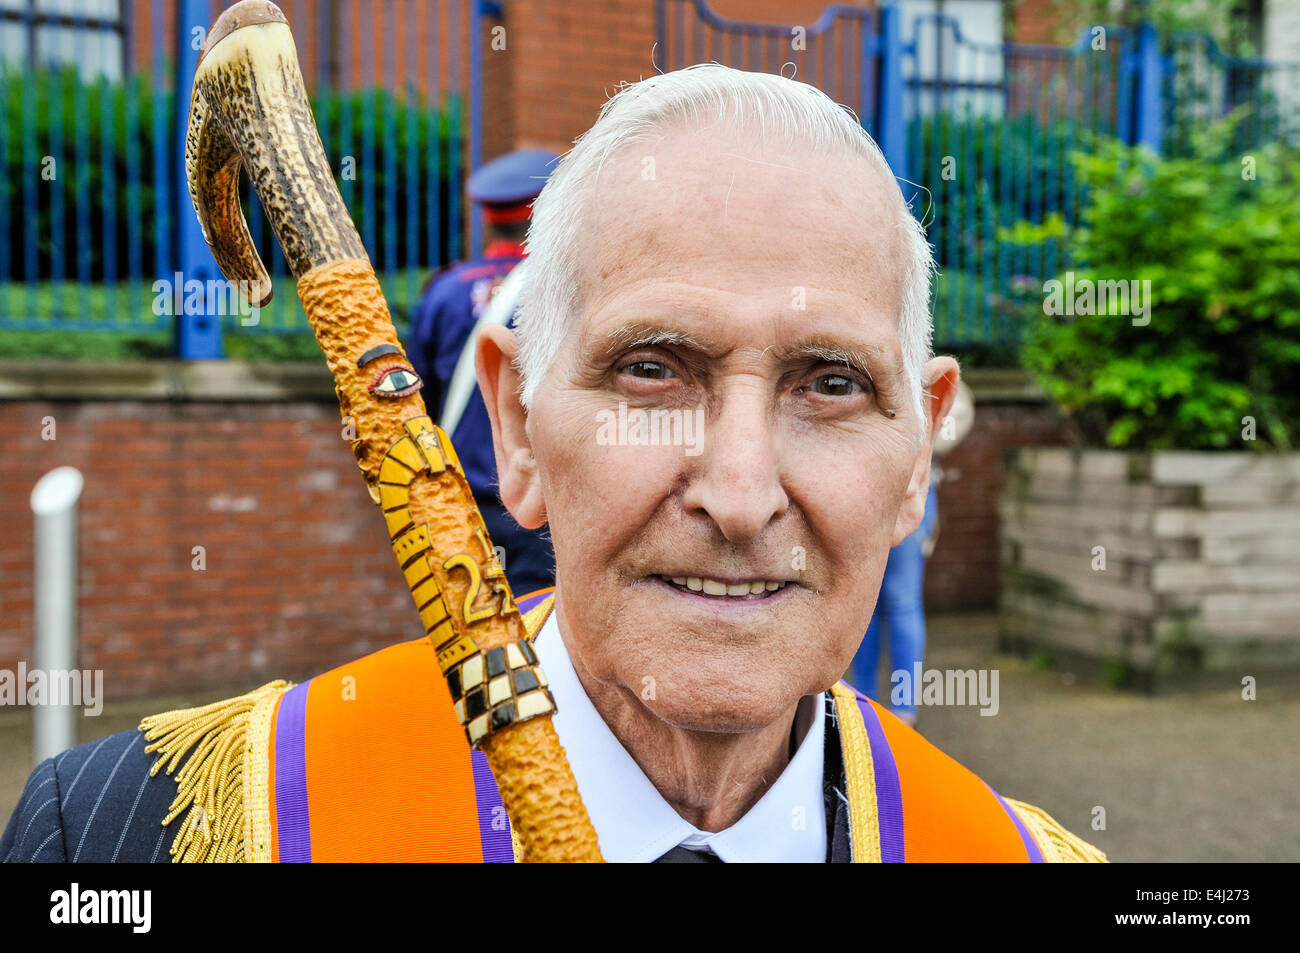 An Orangeman with an ornately carved walking stick, depicting scenes and symbols of the Orange Order. Stock Photo